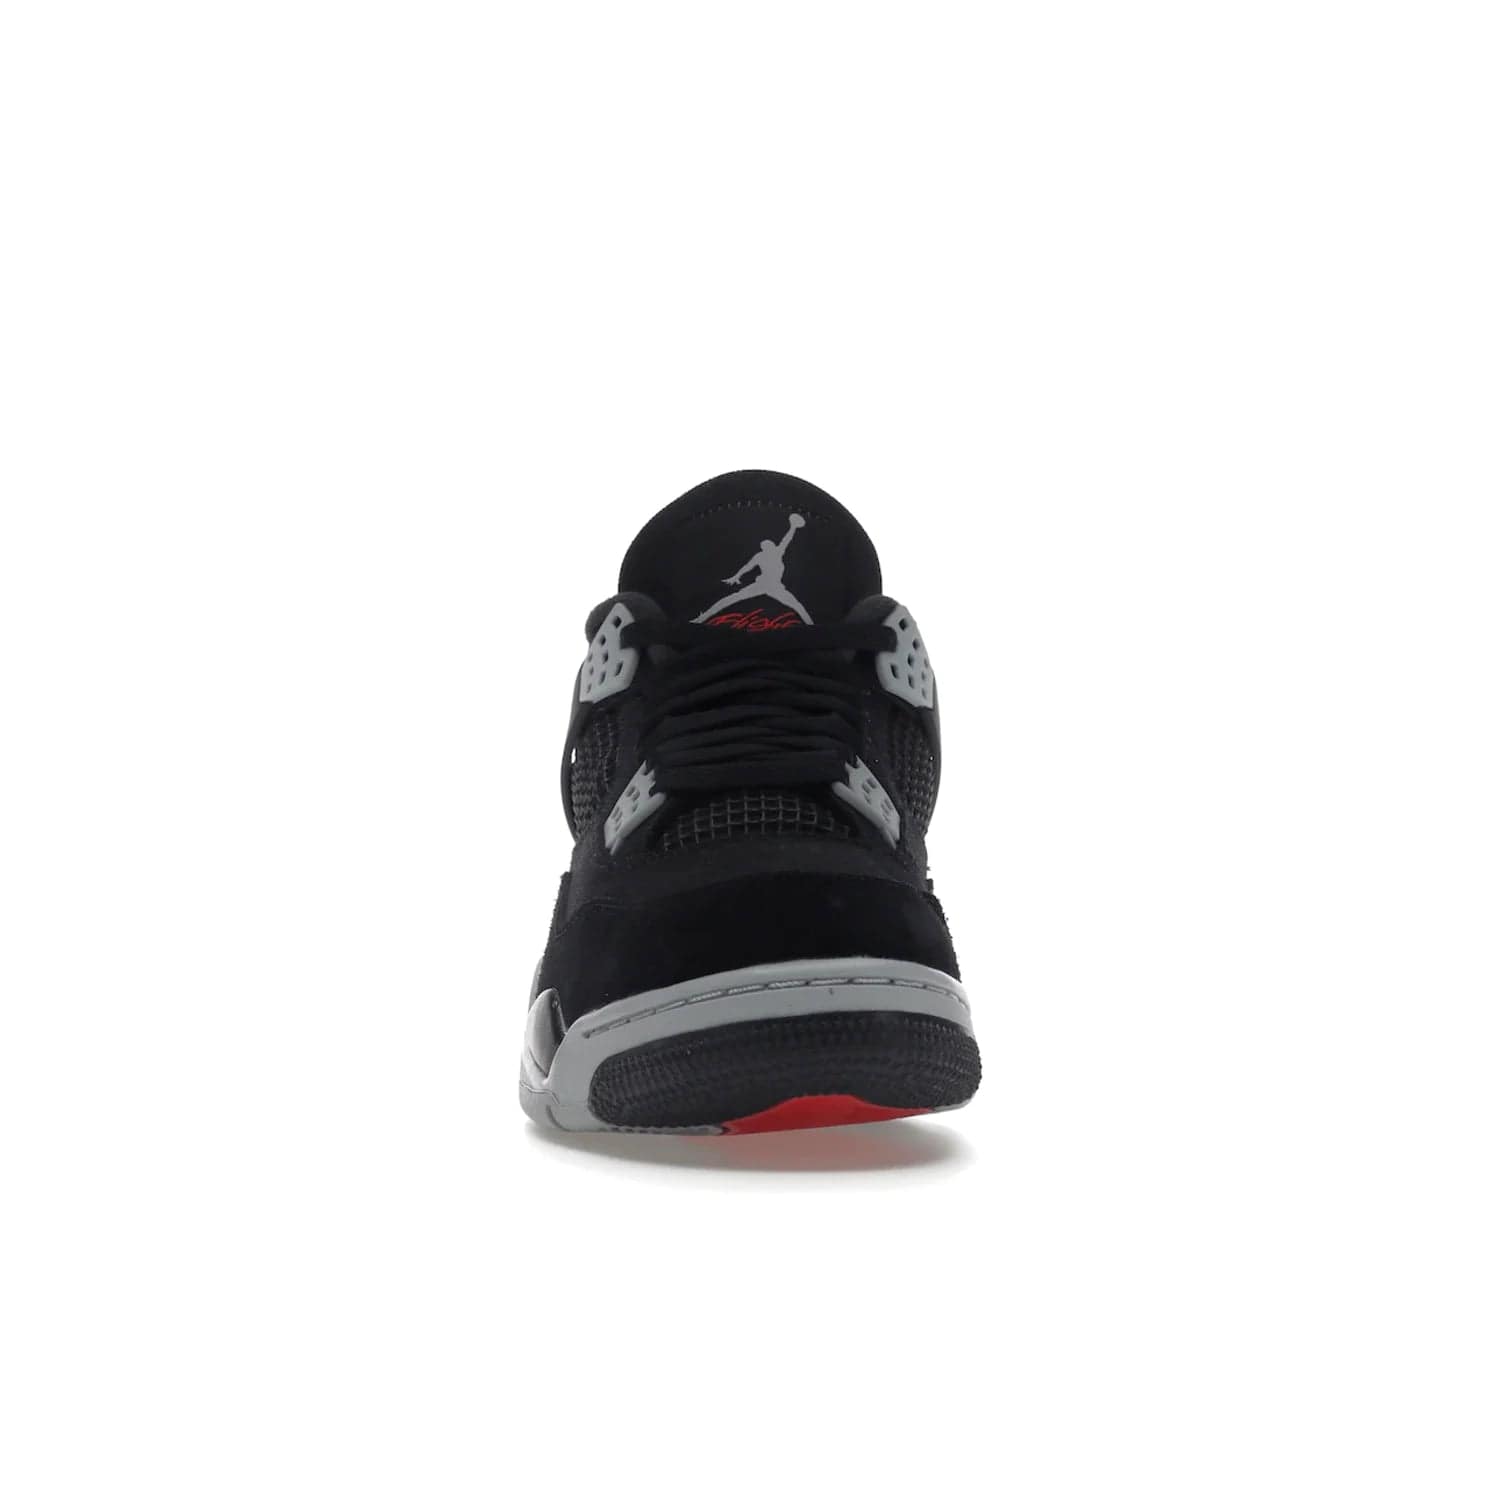 Jordan 4 Retro SE Black Canvas - Image 10 - Only at www.BallersClubKickz.com - The Air Jordan 4 Retro SE Black Canvas brings timeless style and modern luxury. Classic mid-top sneaker in black canvas and grey suede with tonal Jumpman logo, Flight logo and polyurethane midsole with visible Air-sole cushioning. Refresh your sneaker collection and rock the Air Jordan 4 Retro SE Black Canvas.